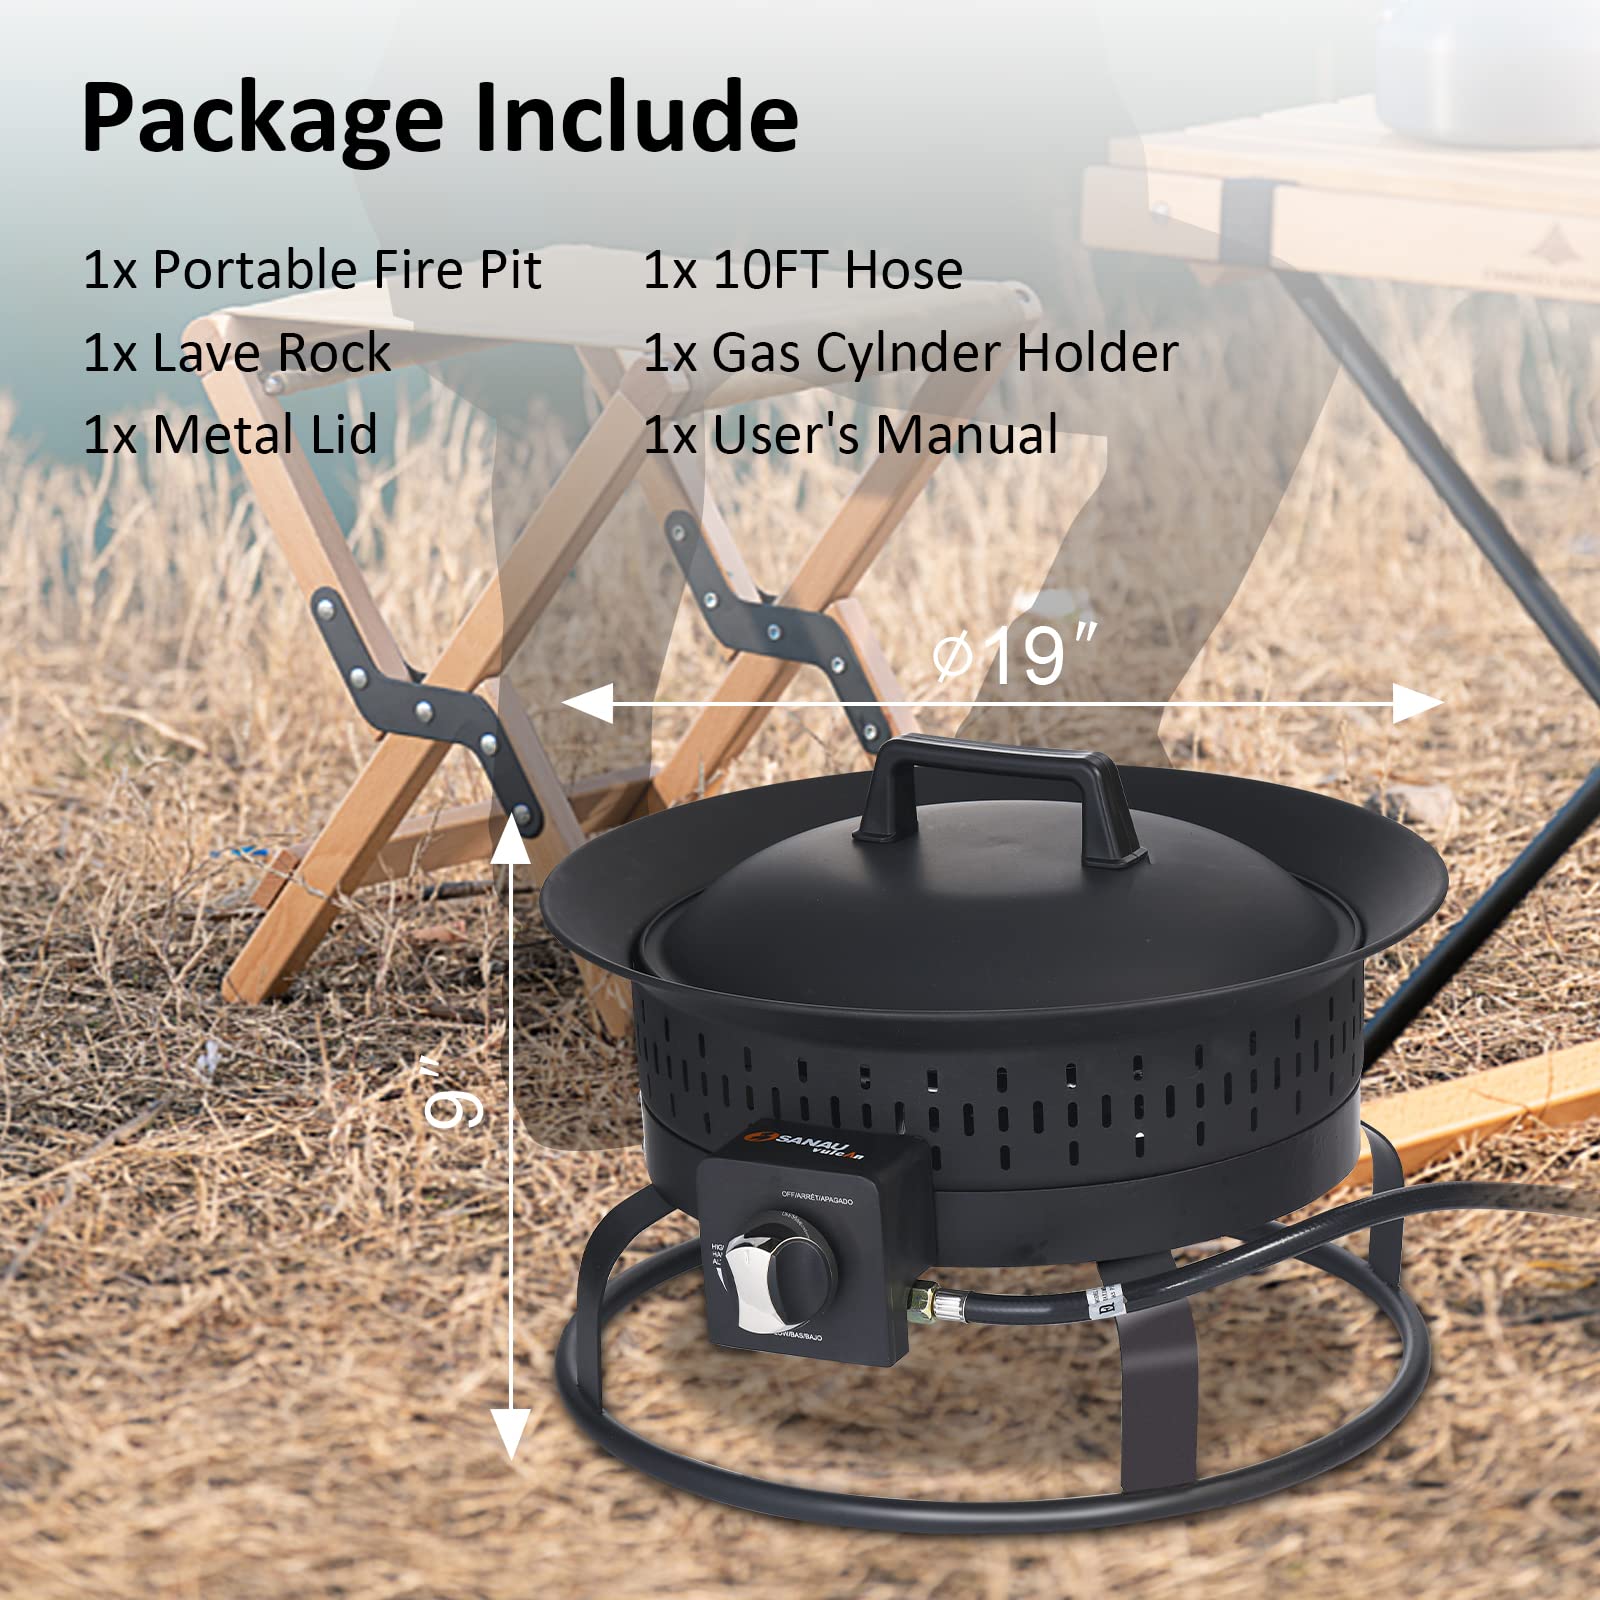 SANAUVULCAN Portable Propane Fire Pit, 58,000 BTU Outdoor Propane Gas Fire Pit for Camping, Backyard, Tailgating and Patio, Gas Fire Pit Bowl with Cover, Lava Rock Stone and Tank Stabilizer Ring